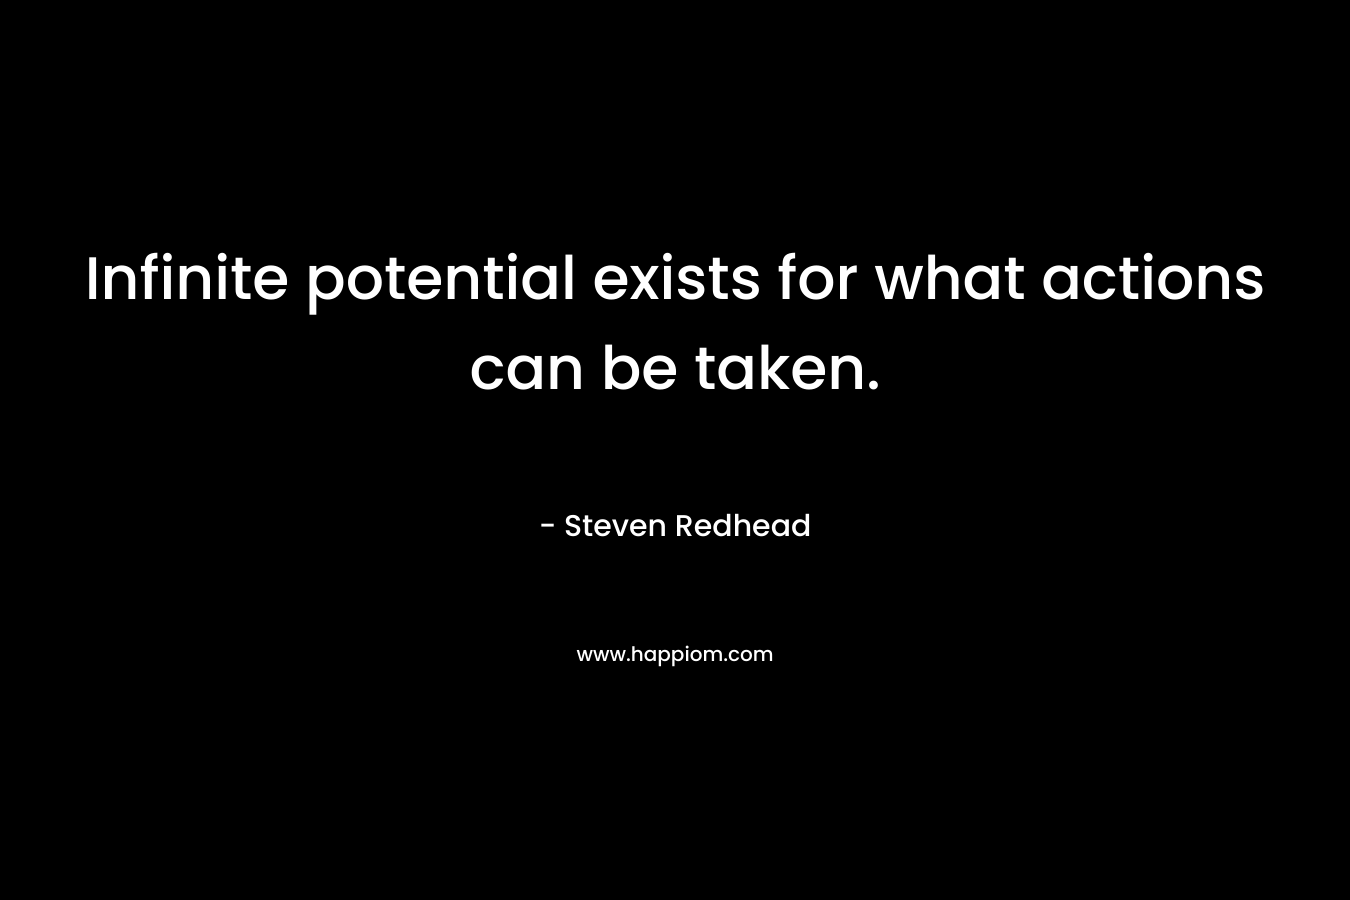 Infinite potential exists for what actions can be taken. – Steven Redhead